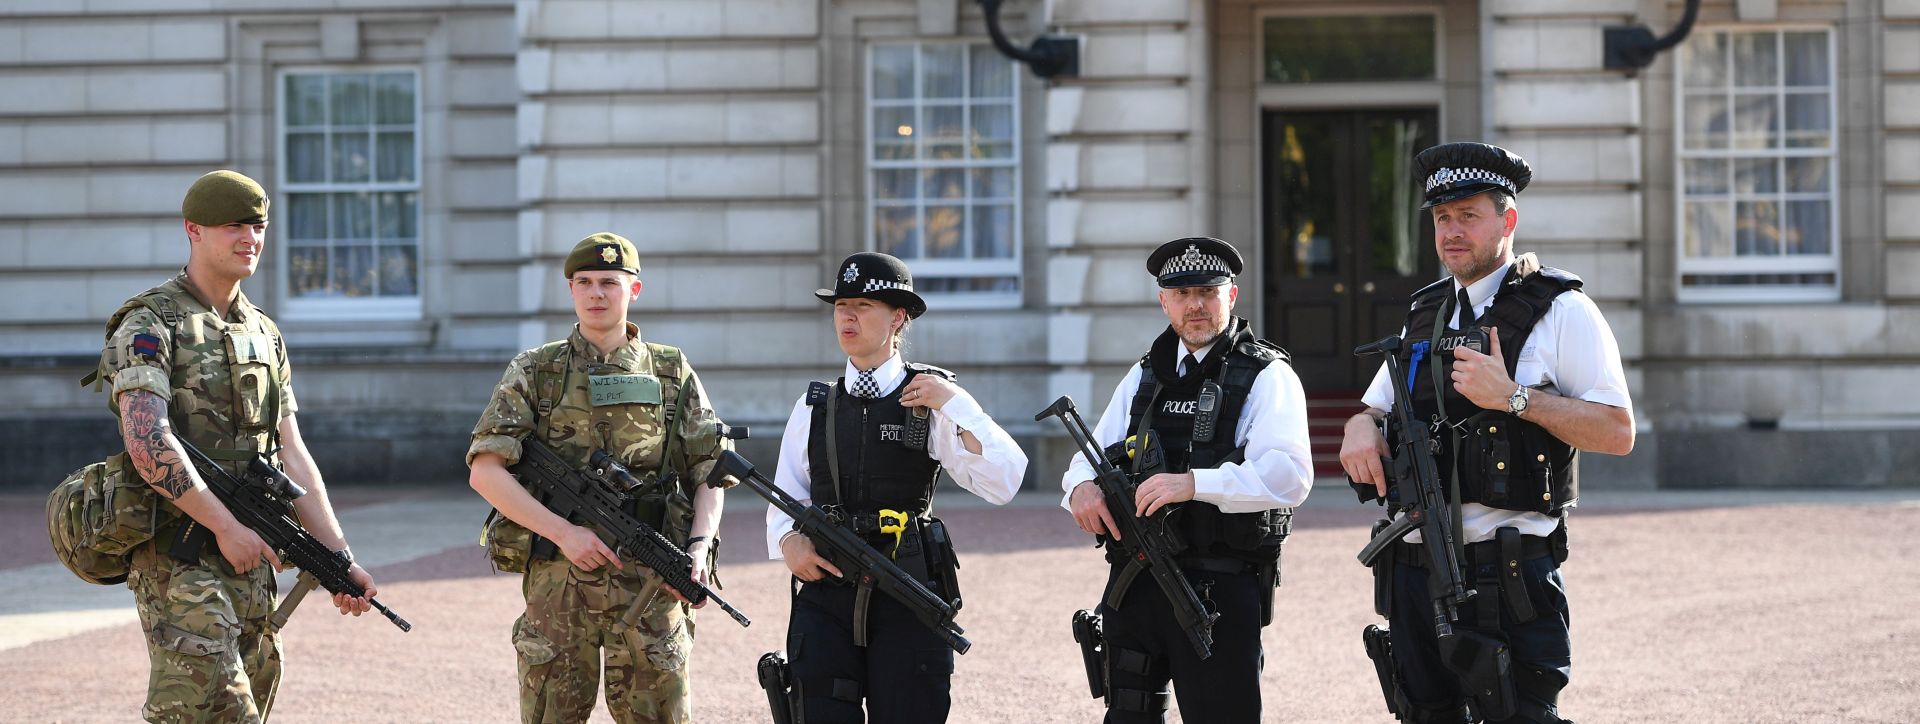 epa05987114 British Army soldierS (L) on guard outside the Buckingham Palace in London, Britain, 24 May 2017, following the terror attack at Manchester Arena on 22 May 2017 at the end of US singer Ariana Grande's concert in the arena.  EPA/FACUNDO ARRIZABALAGA